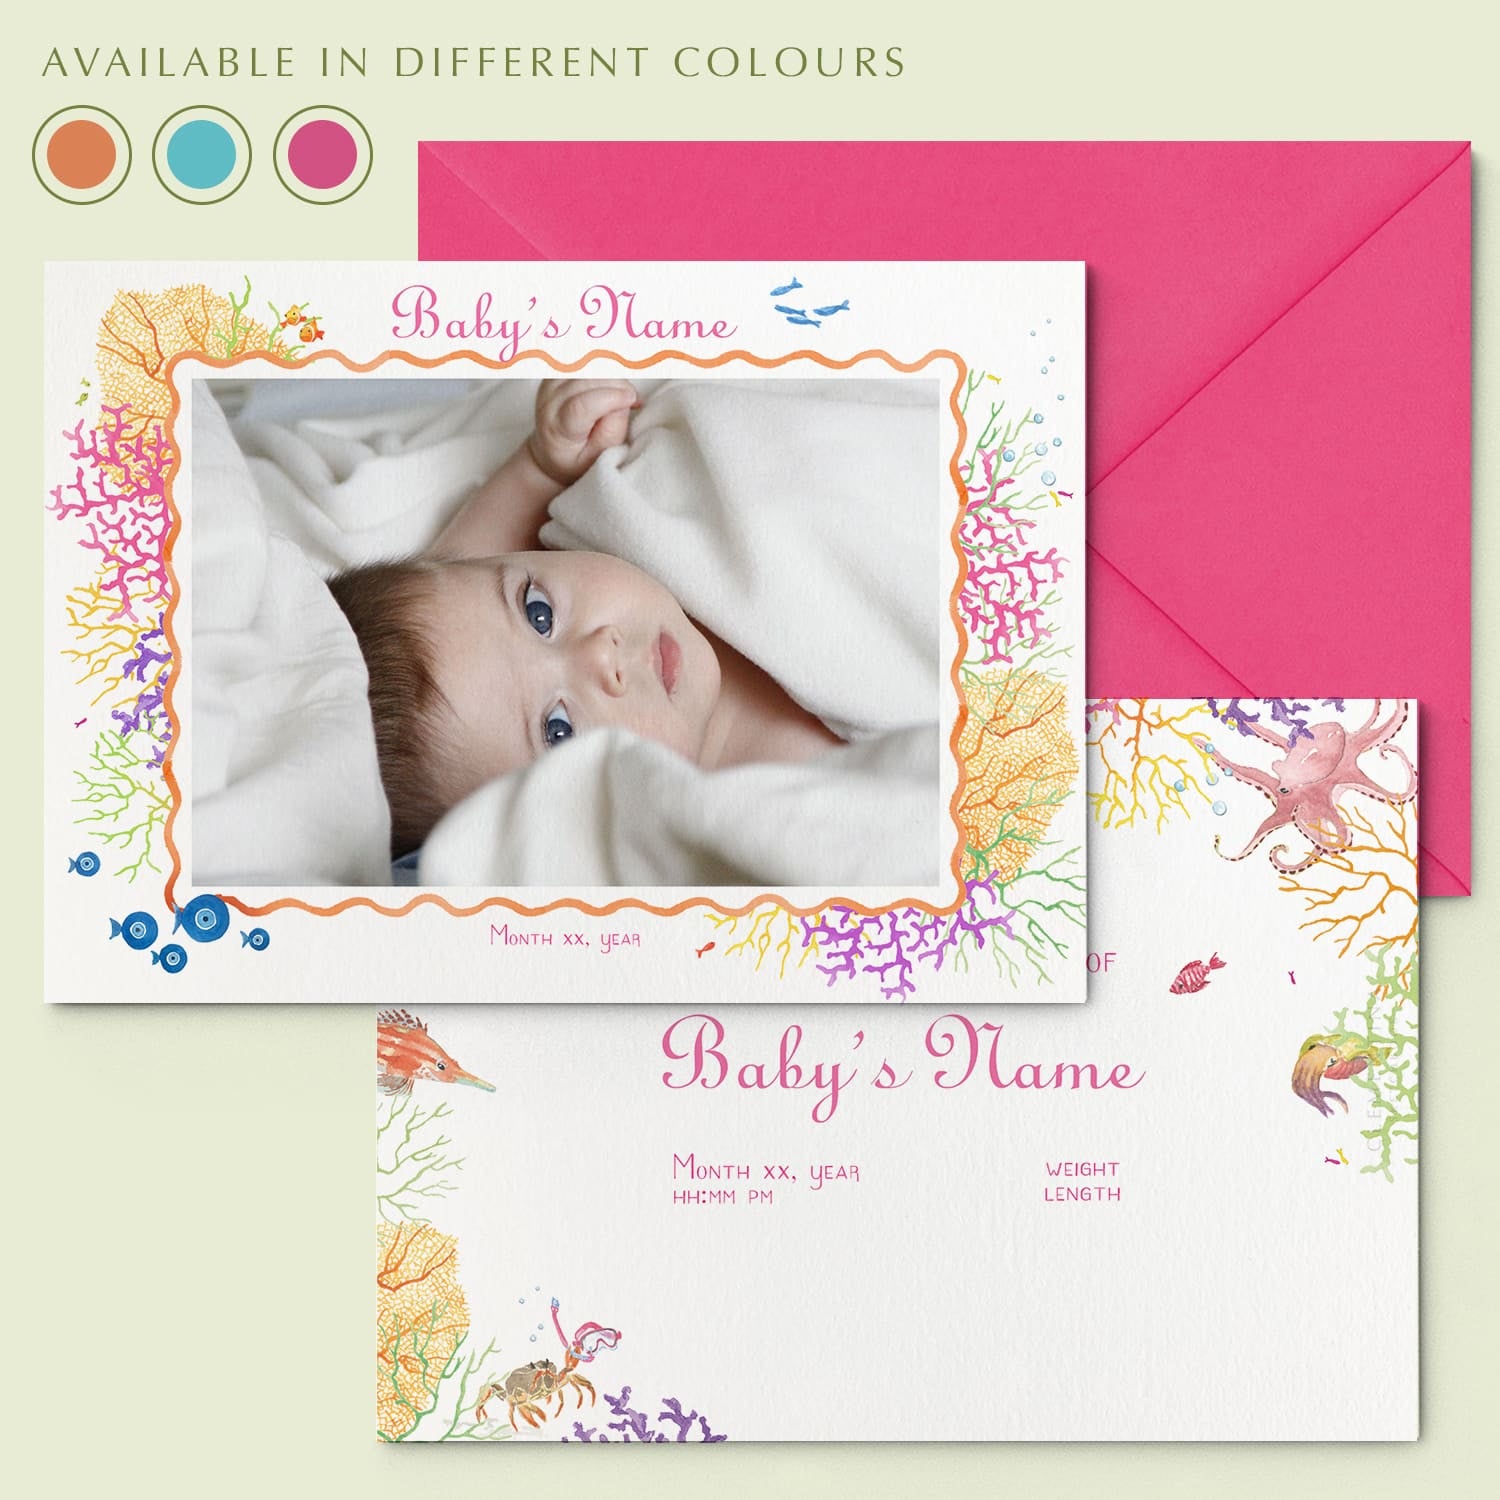 Coral Reef Printed Birth Announcements - With Photo - Cover - 01